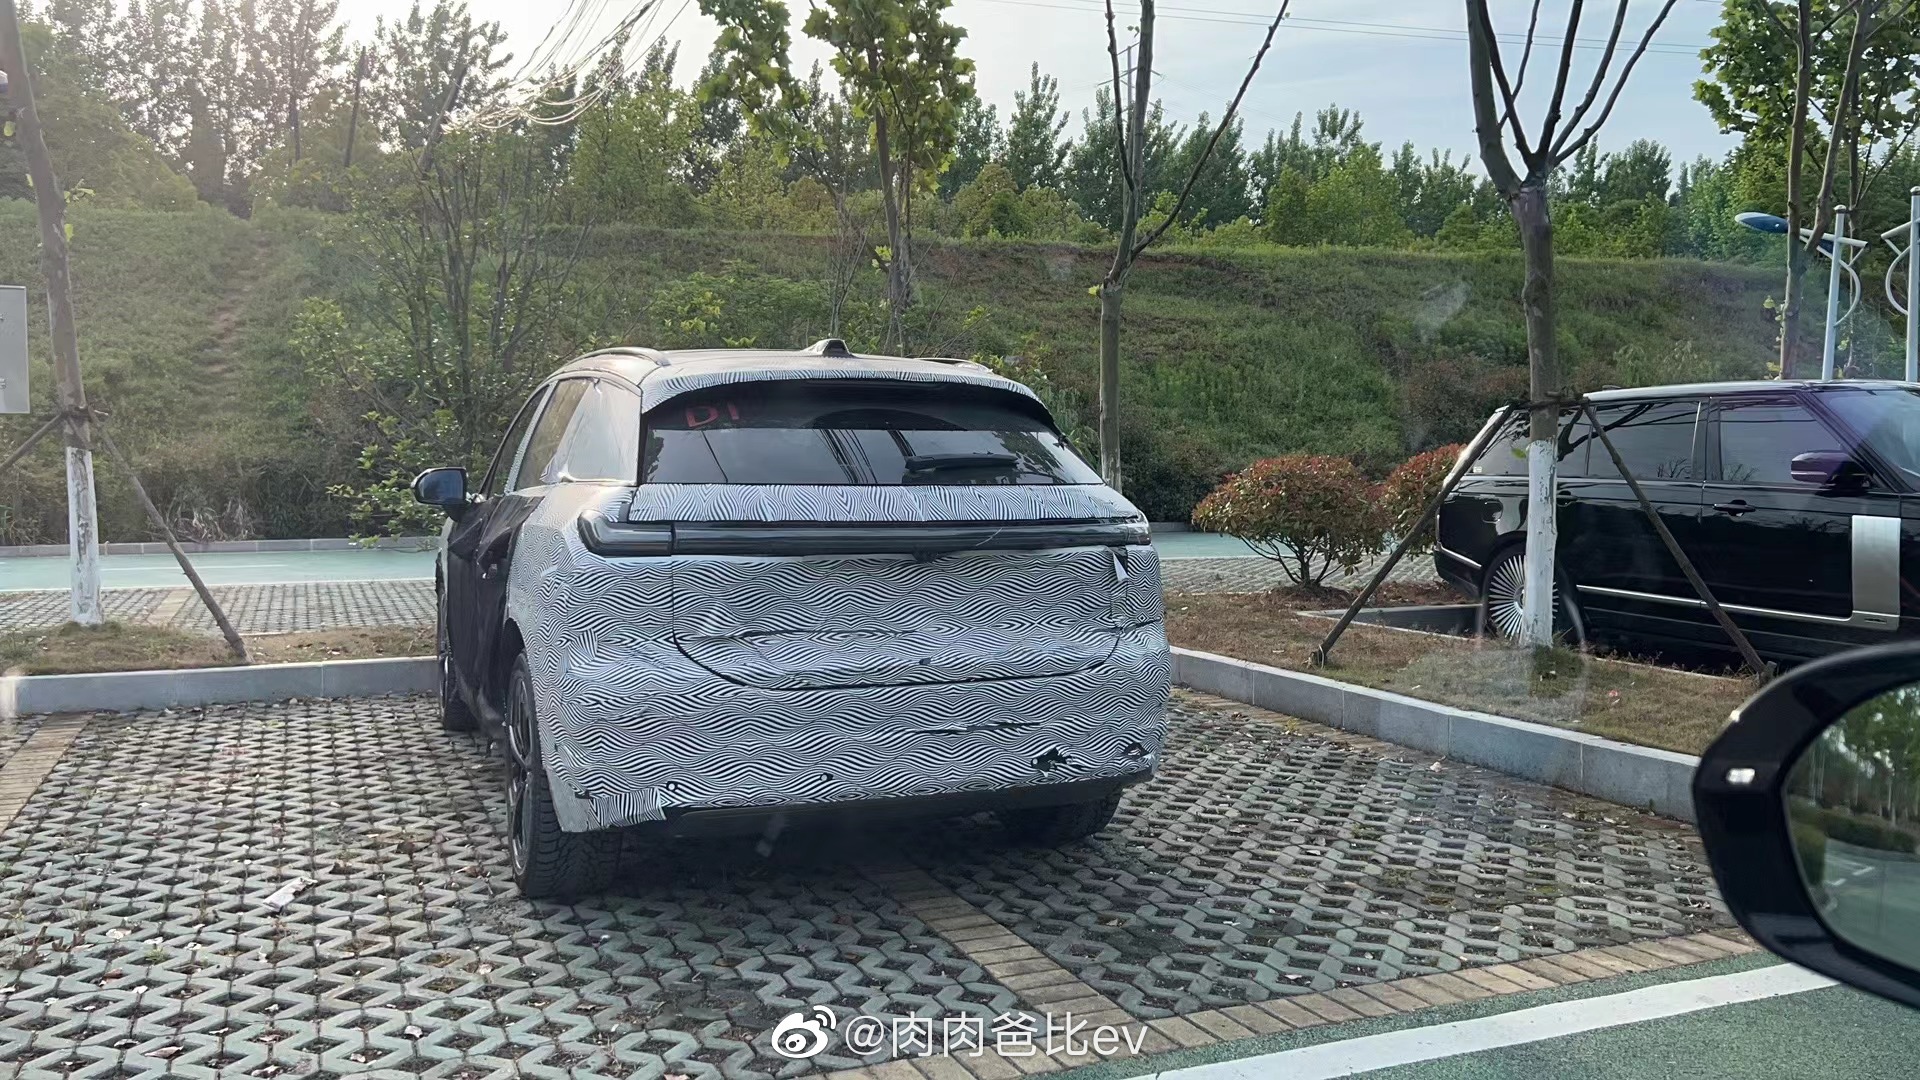 More spy photos of NIO ES7 revealed ahead of planned unveiling in late May-CnEVPost